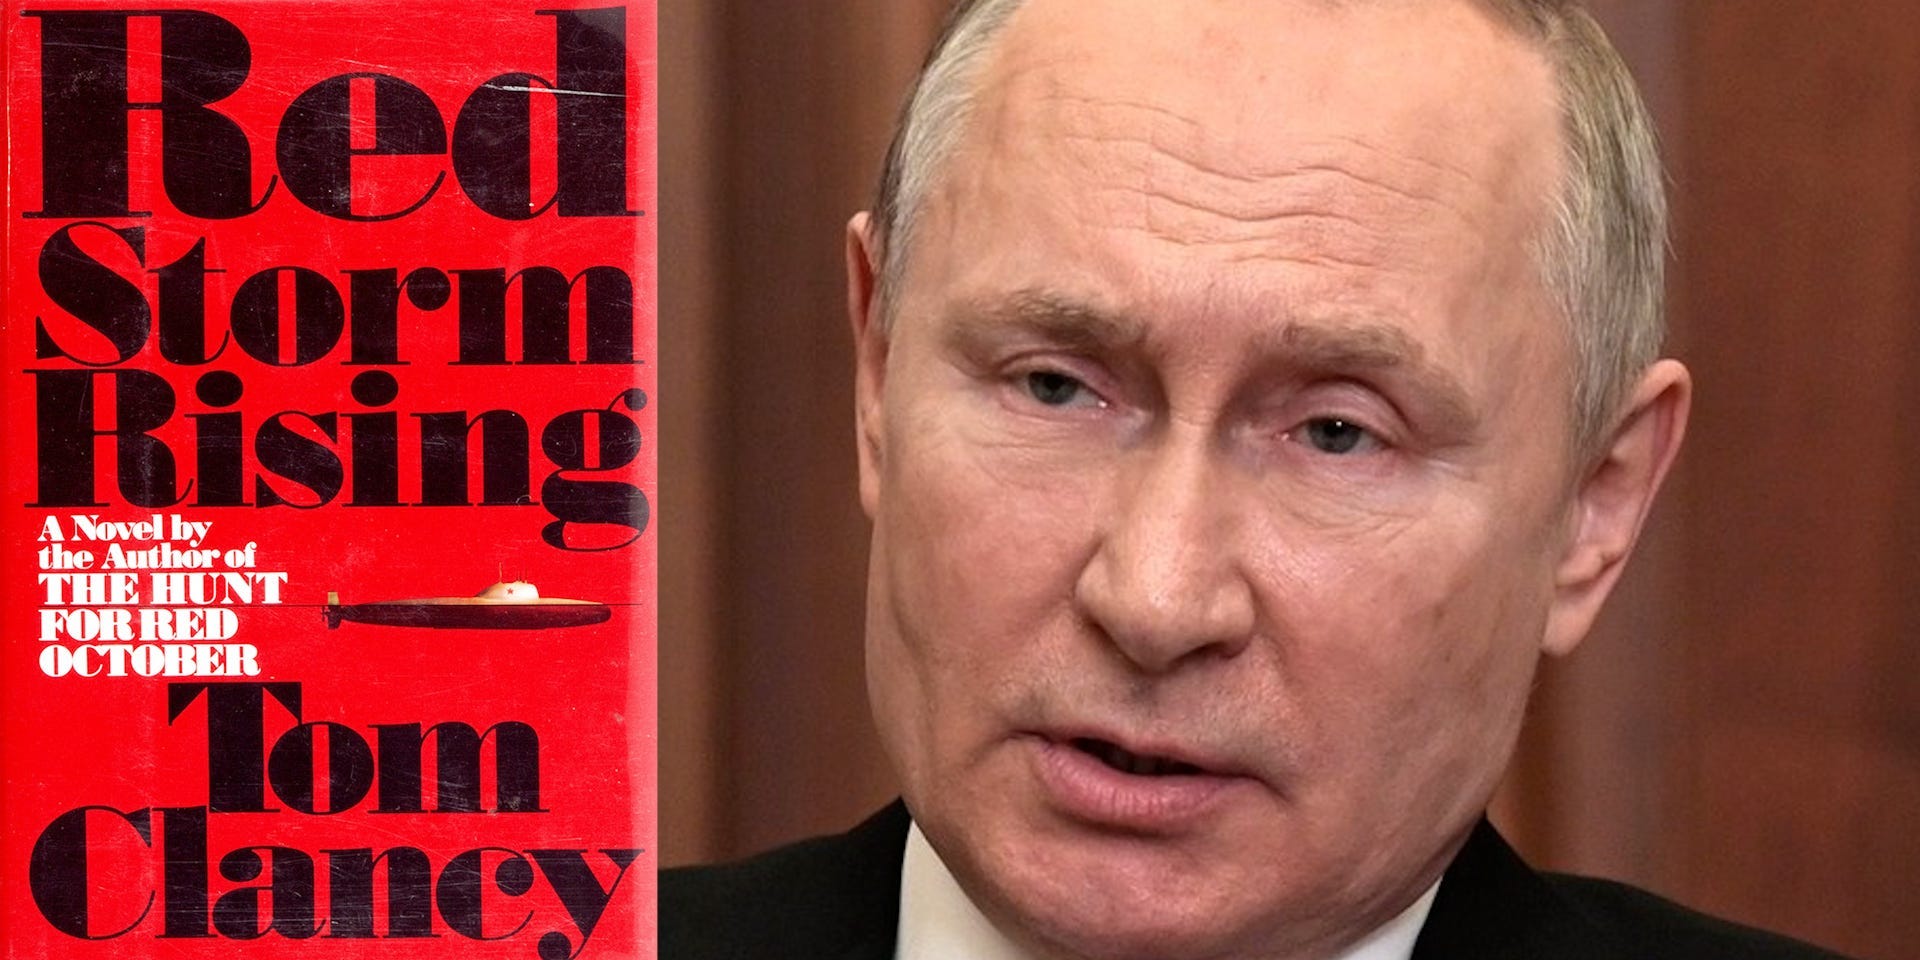 The cover of author Tom Clancy's 1986 novel "Red Storm Rising" (left) and Russian president Vladimir Putin (right)